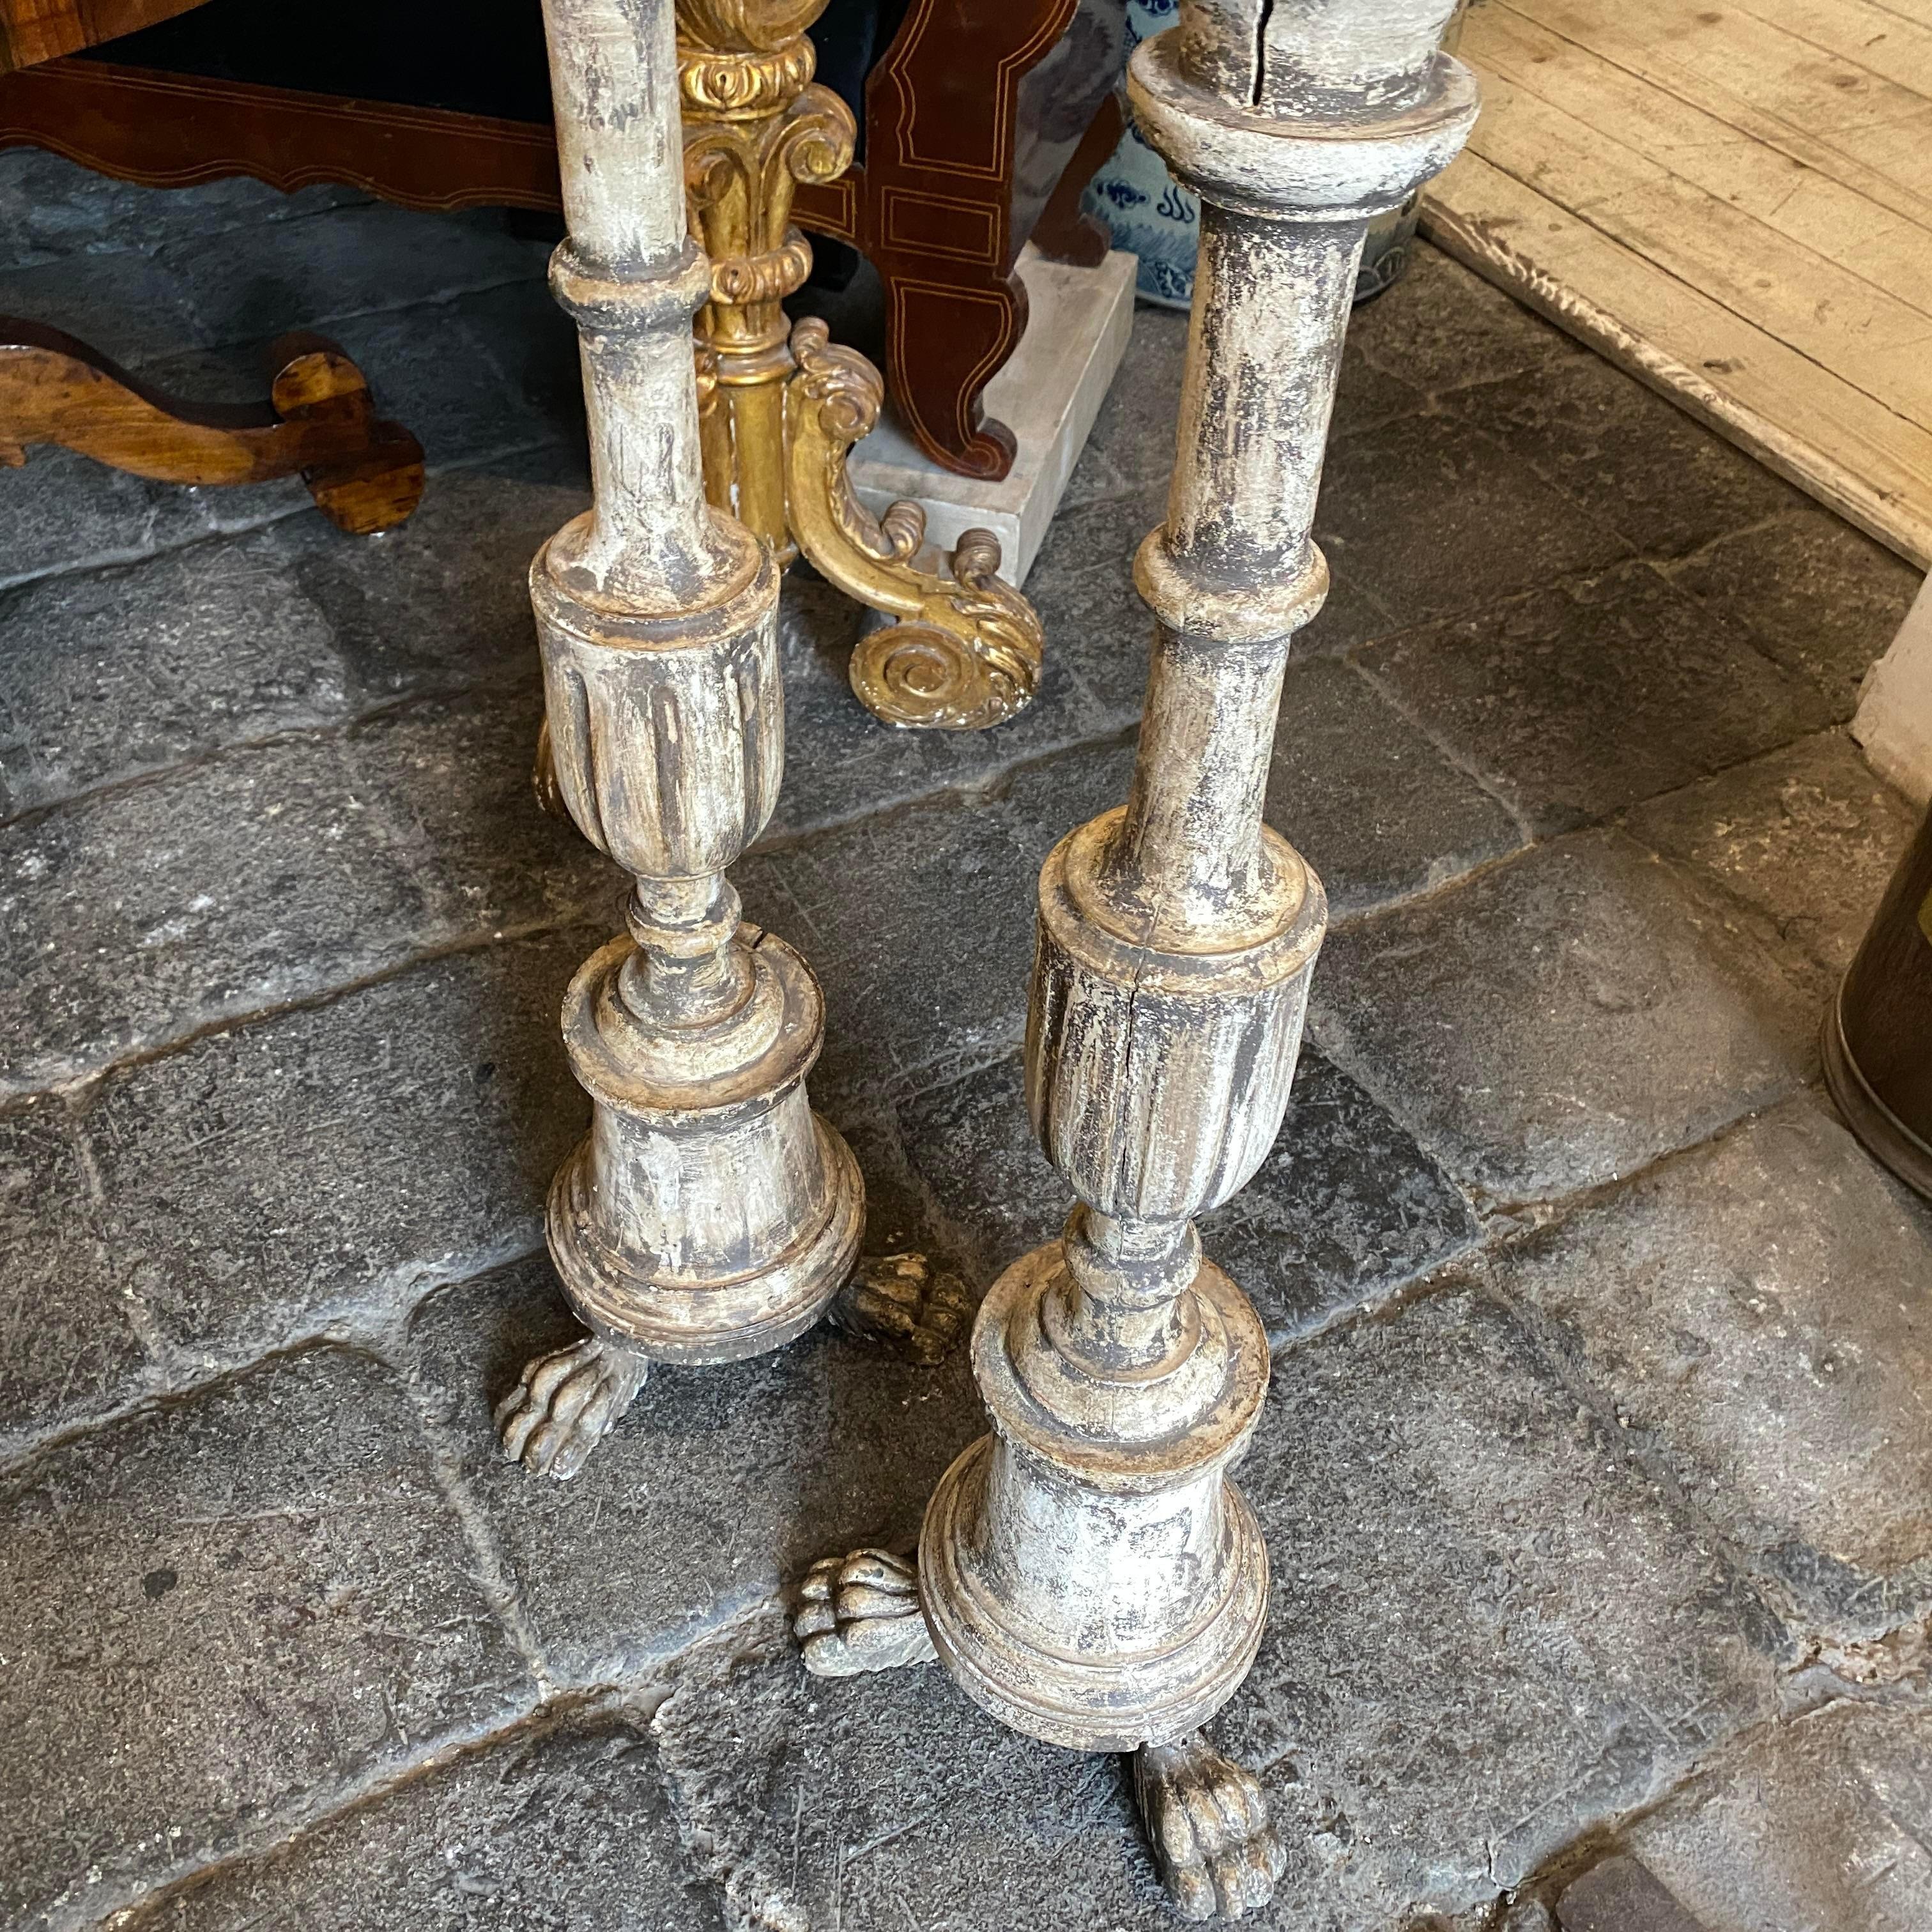 Two hand-carved wood candle holders made in Italy in the second half of 19th century, they have lion paws and an amazing old white and gray original patina. They have real signs of use and age visible on the photos. they came from an old private